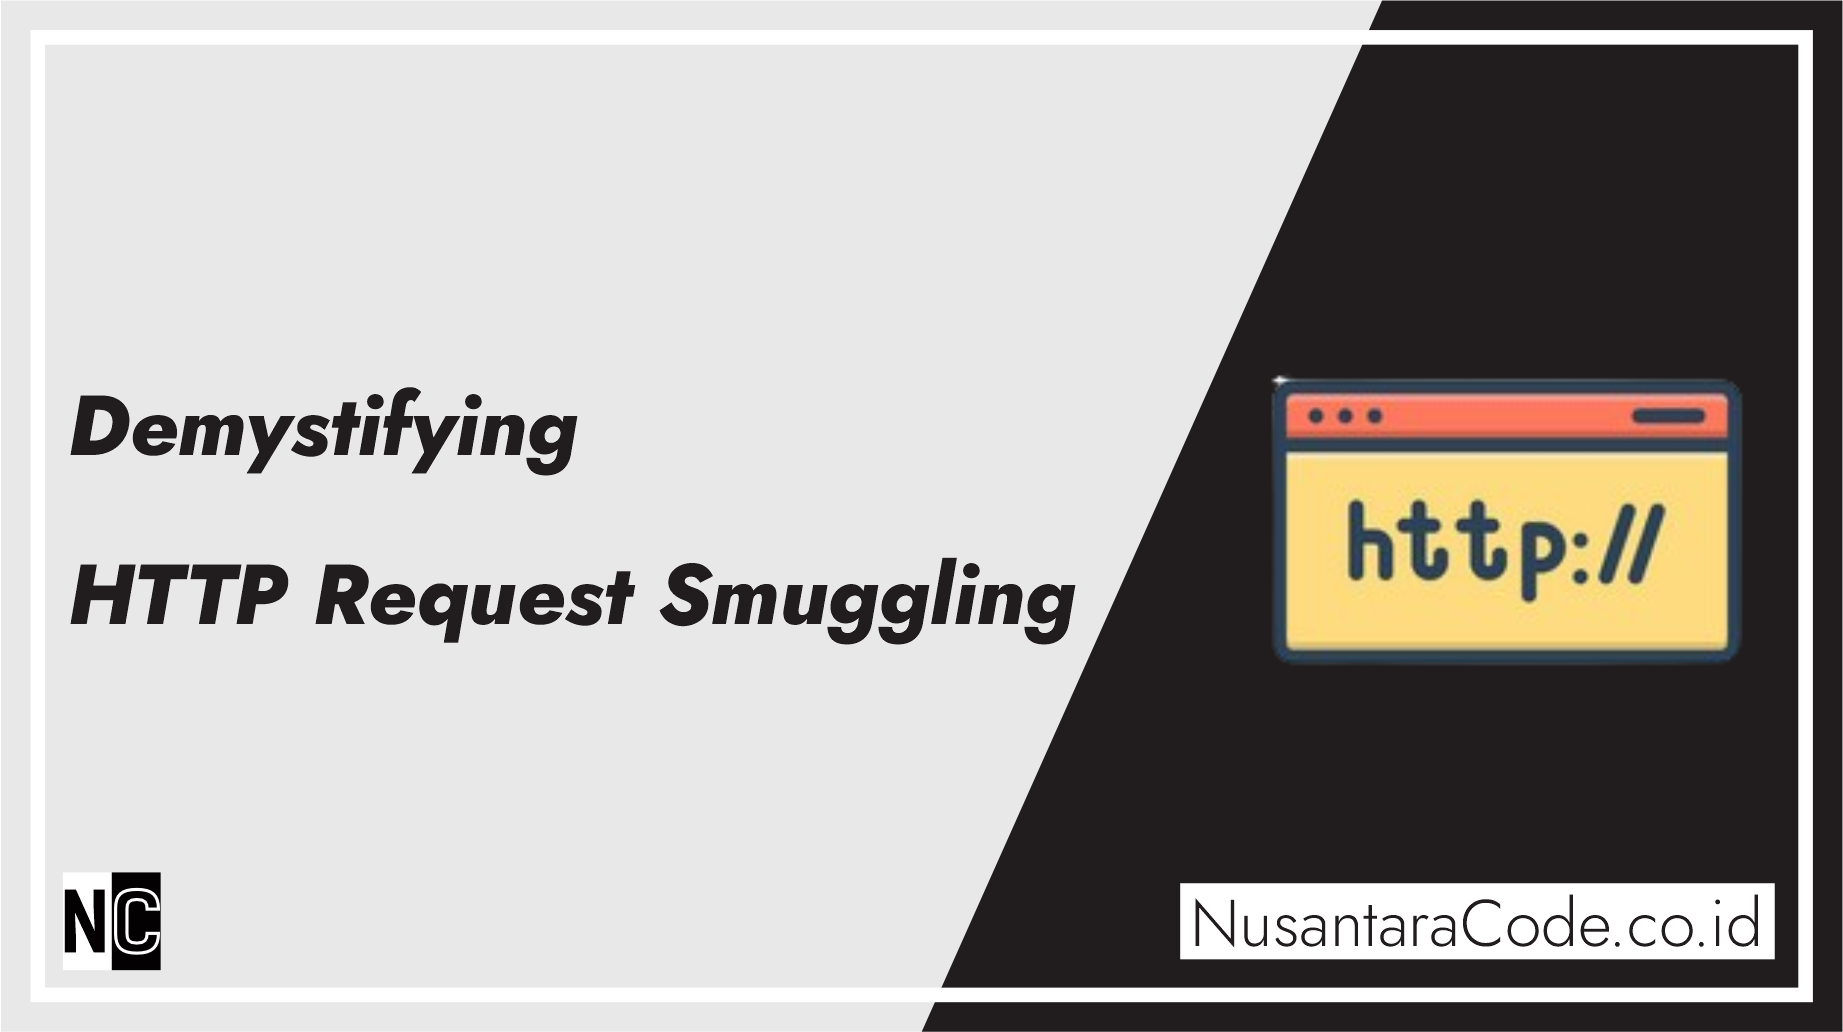 Demystifying HTTP Request Smuggling: Risks and Mitigation